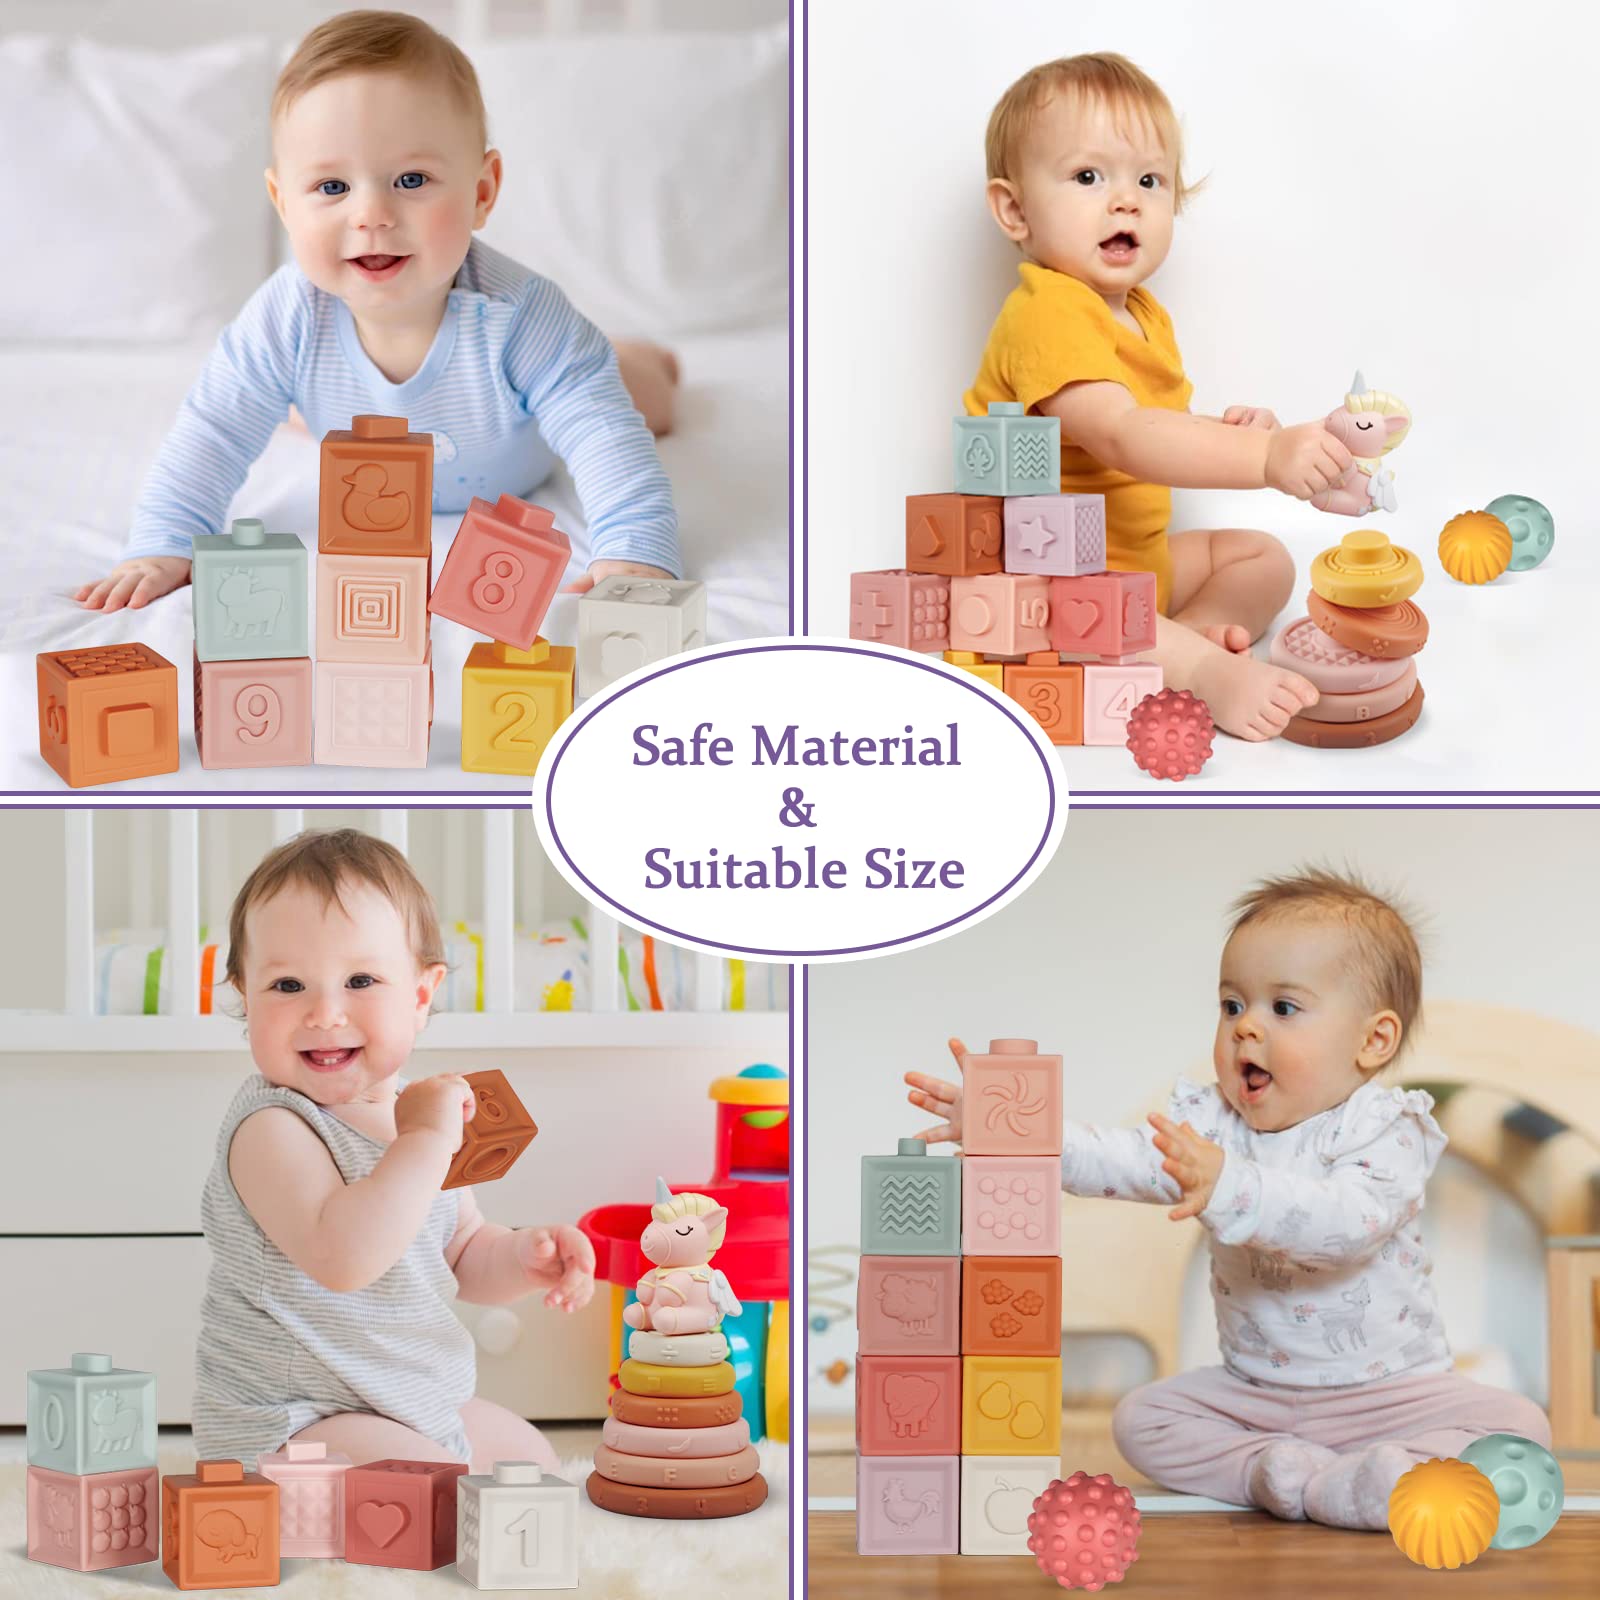 IFLOVE Baby Toys 6 to 12 Months,Montessori Toys for Infant,3 in 1 Soft Stacking Building Blocks Rings Balls Sets with Unicorn Toy,Toddlers Sensory Learning Teething Shower Gifts for 6 12 18 Months